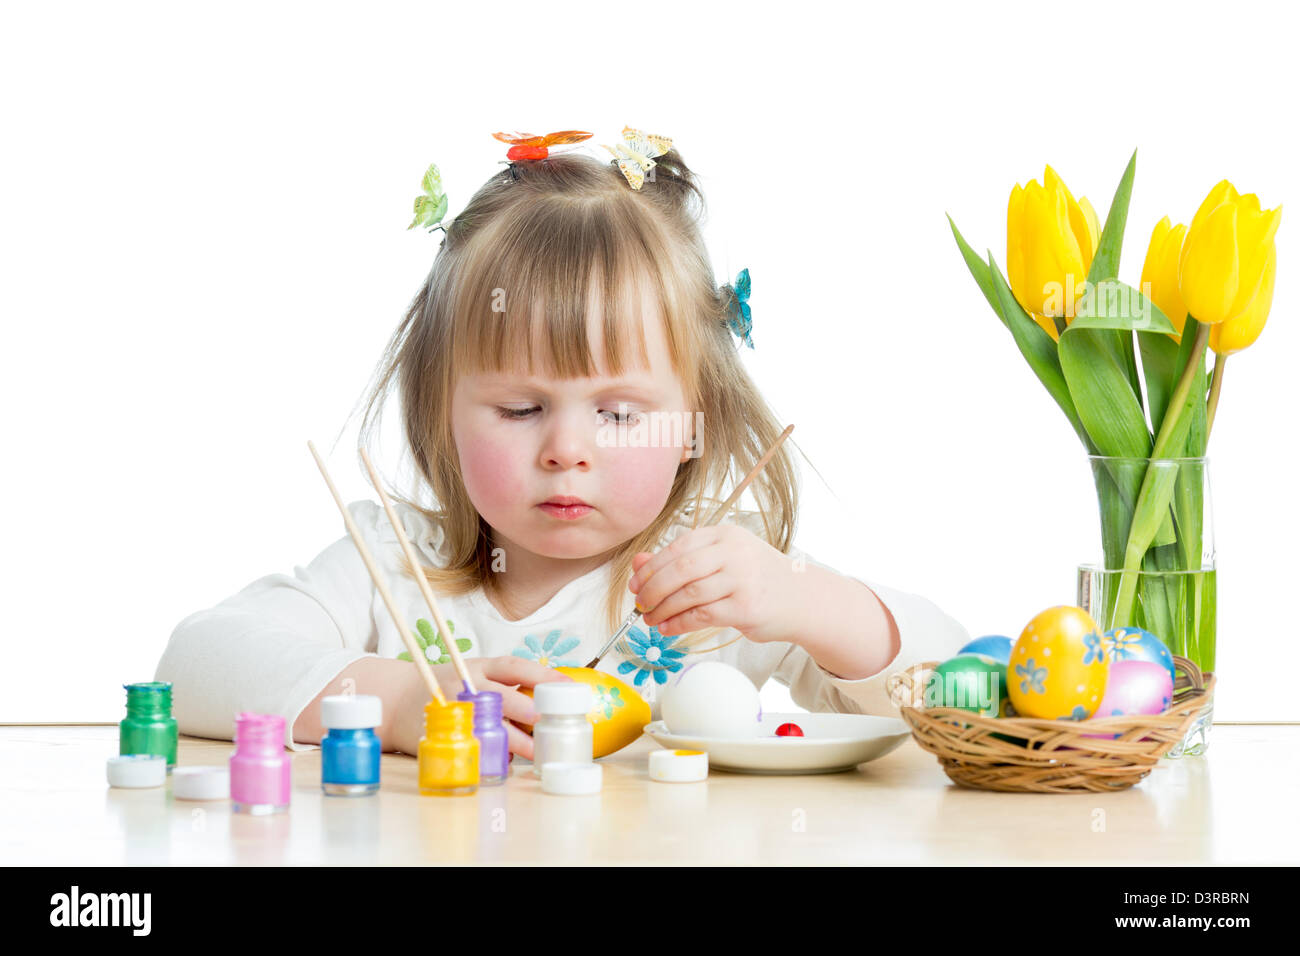 baby girl painting Easter eggs isolated on white background Stock Photo